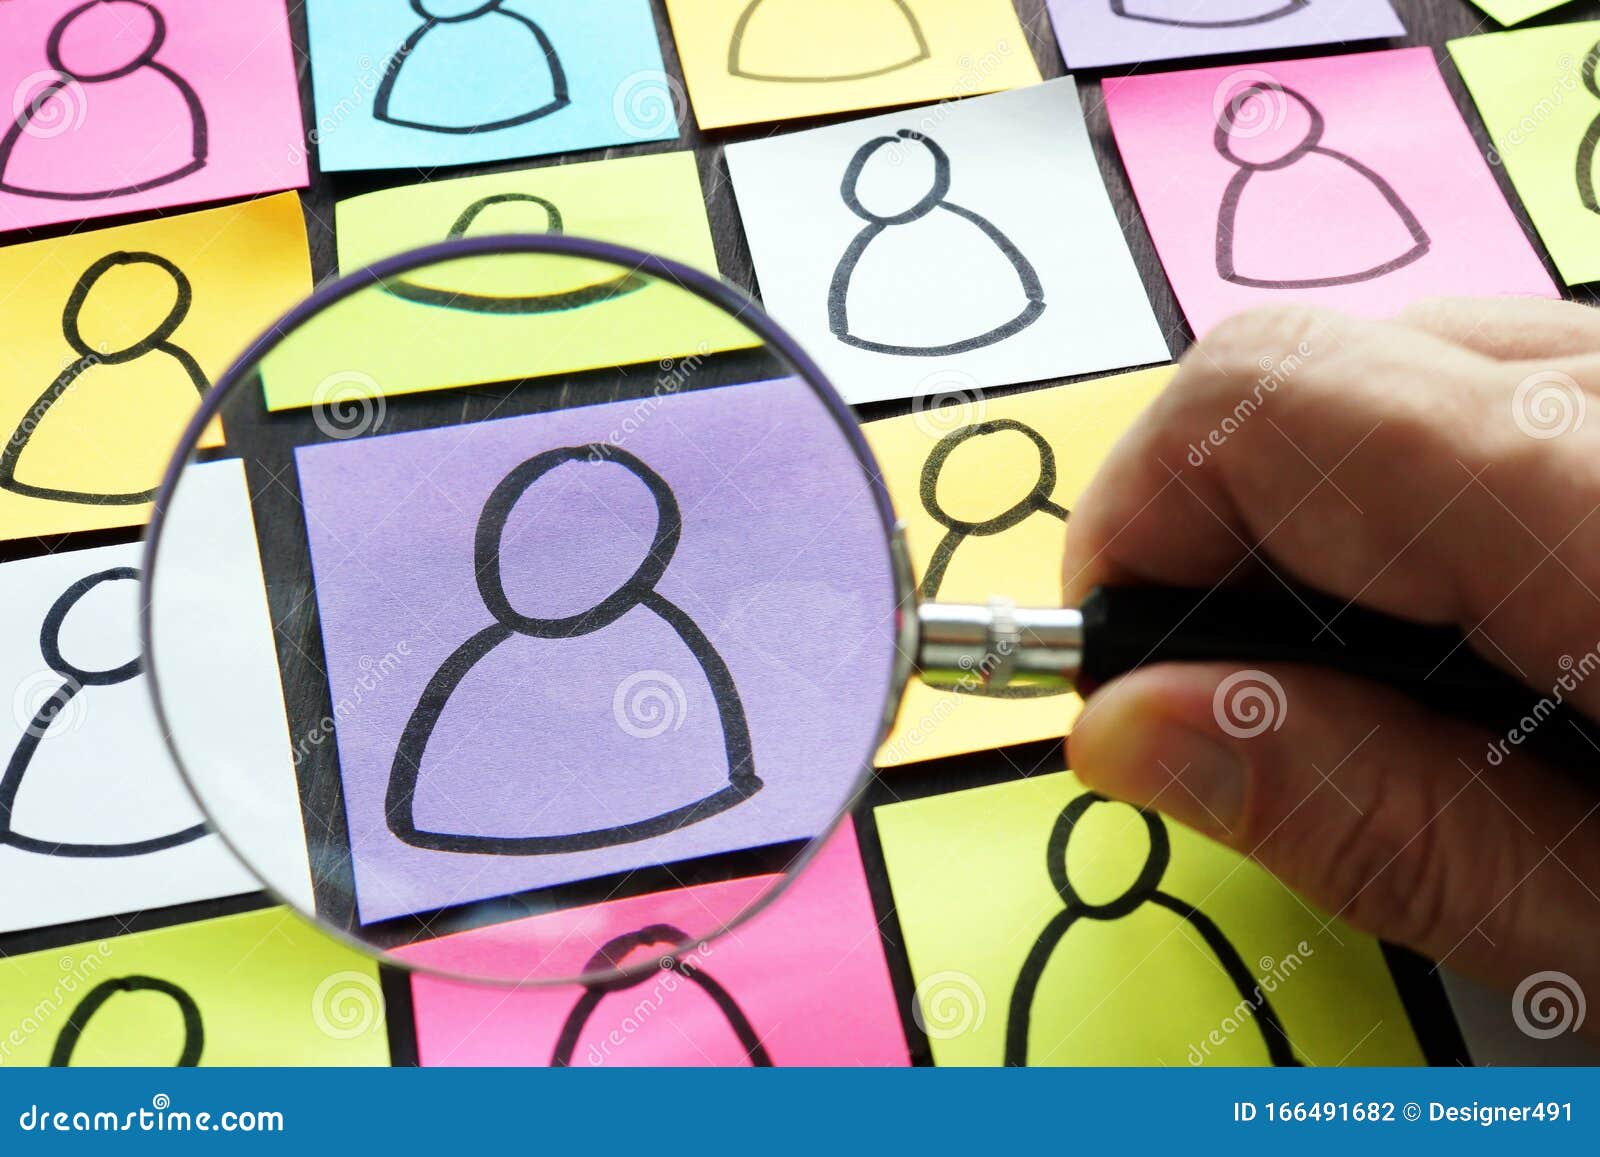 market or consumer research. drawn figures of people and magnifying glass